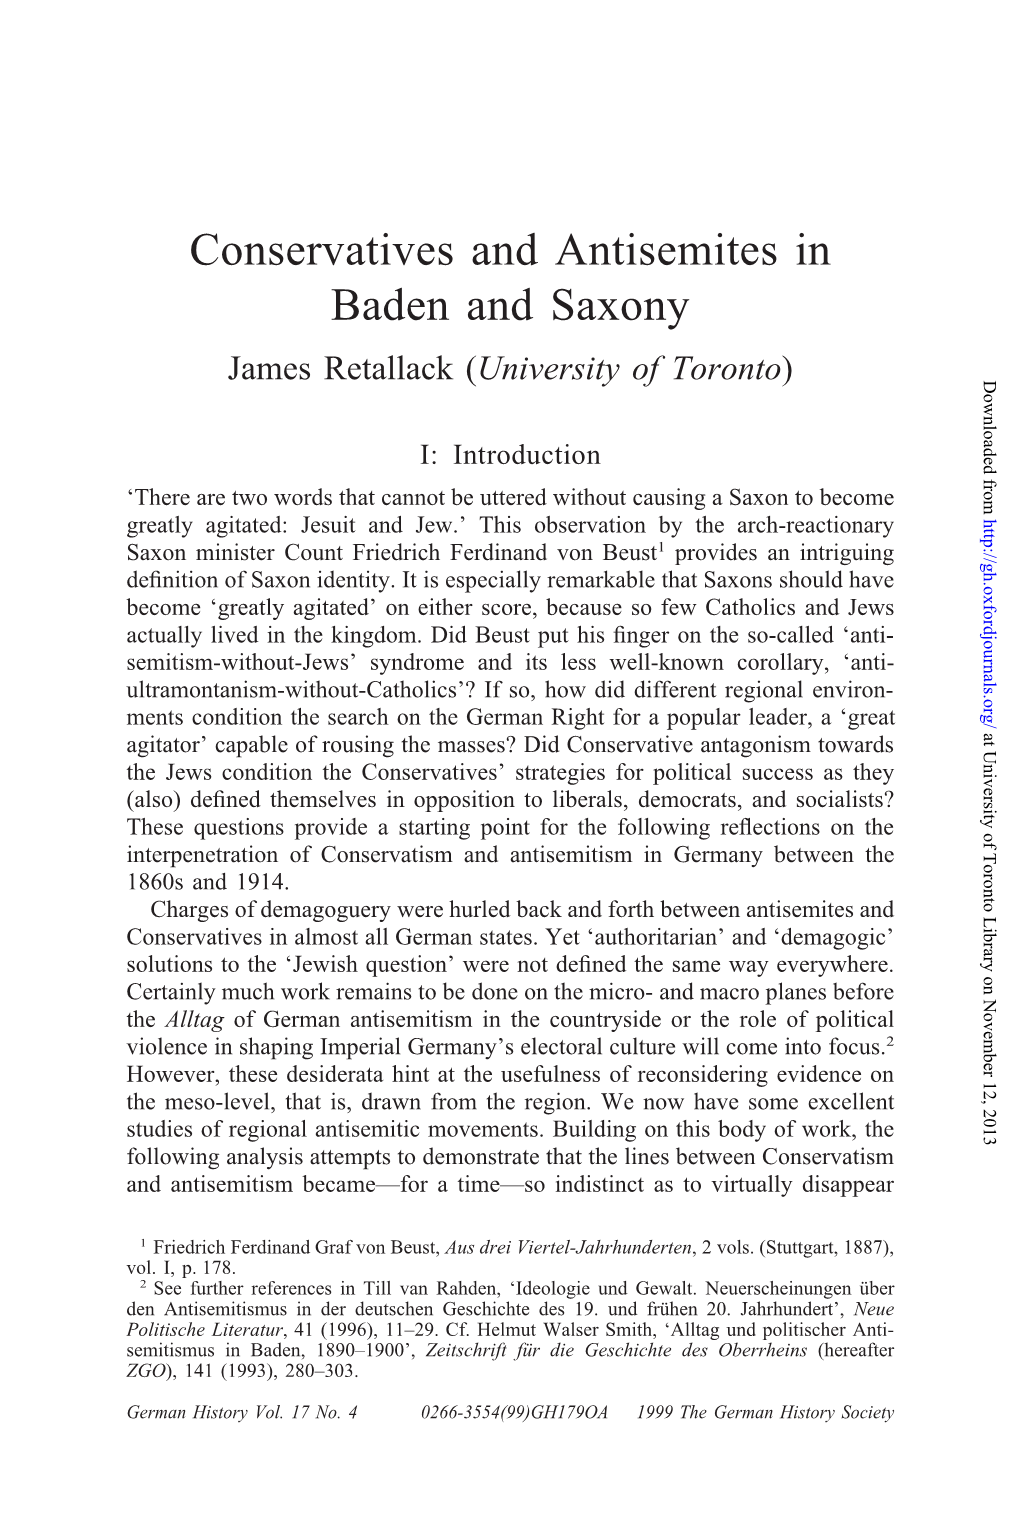 Conservatives and Antisemites in Baden and Saxony